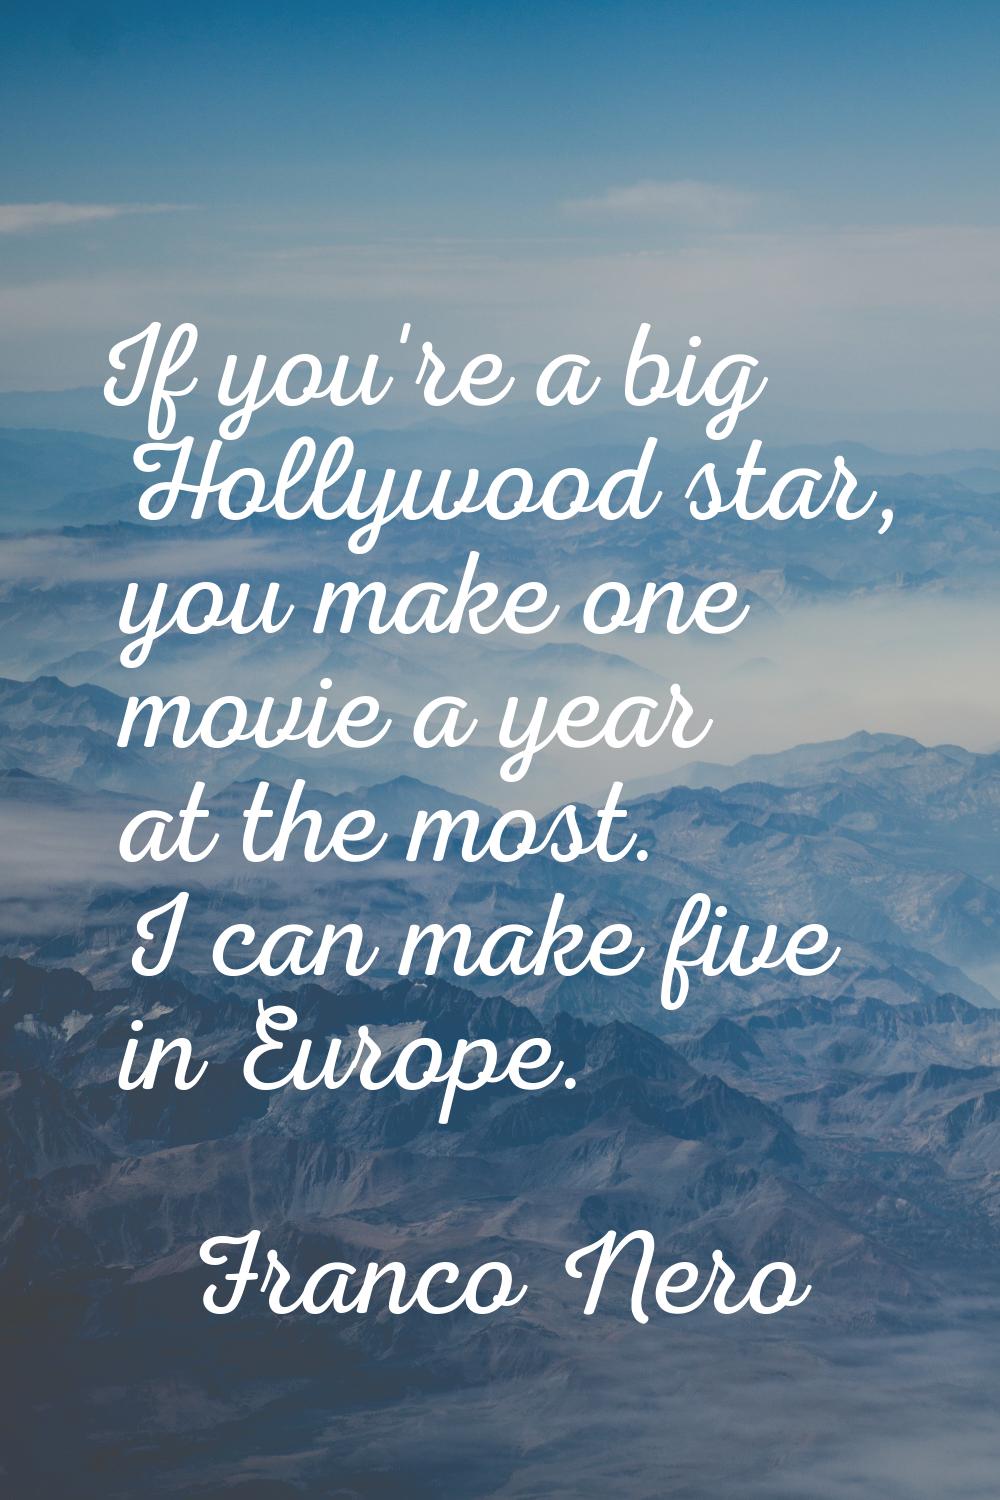 If you're a big Hollywood star, you make one movie a year at the most. I can make five in Europe.